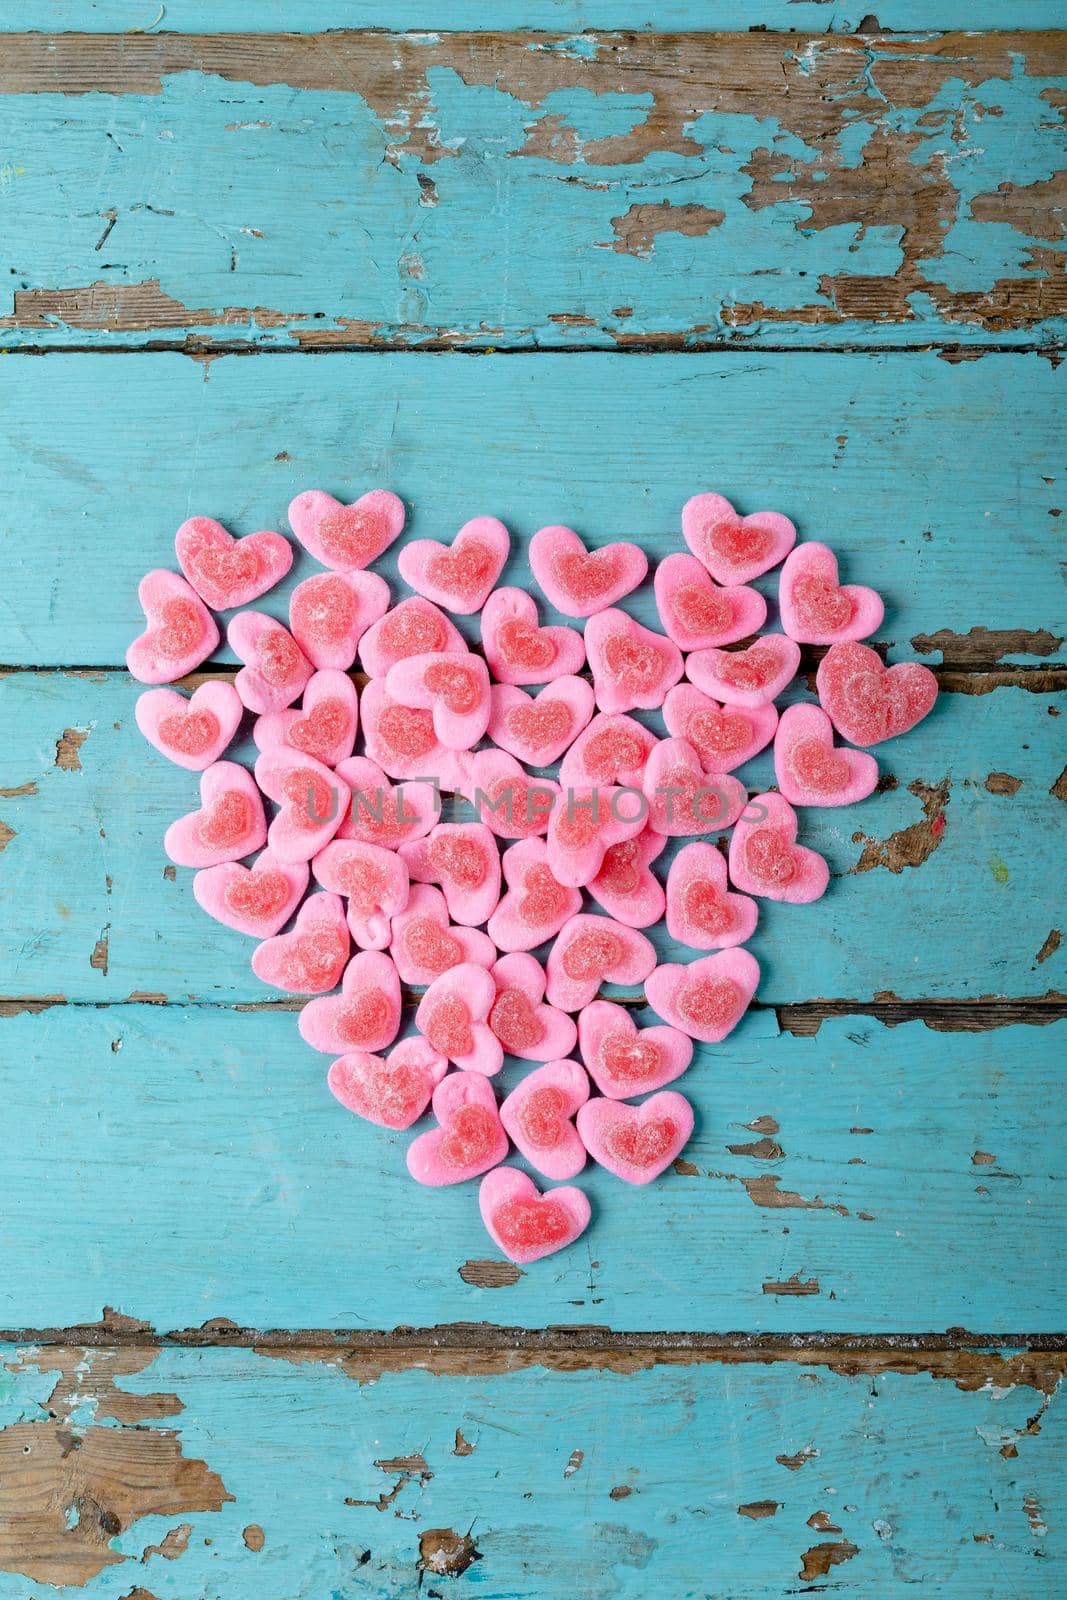 Overhead view of heart shaped pink candies arranged on wooden table, copy space by Wavebreakmedia